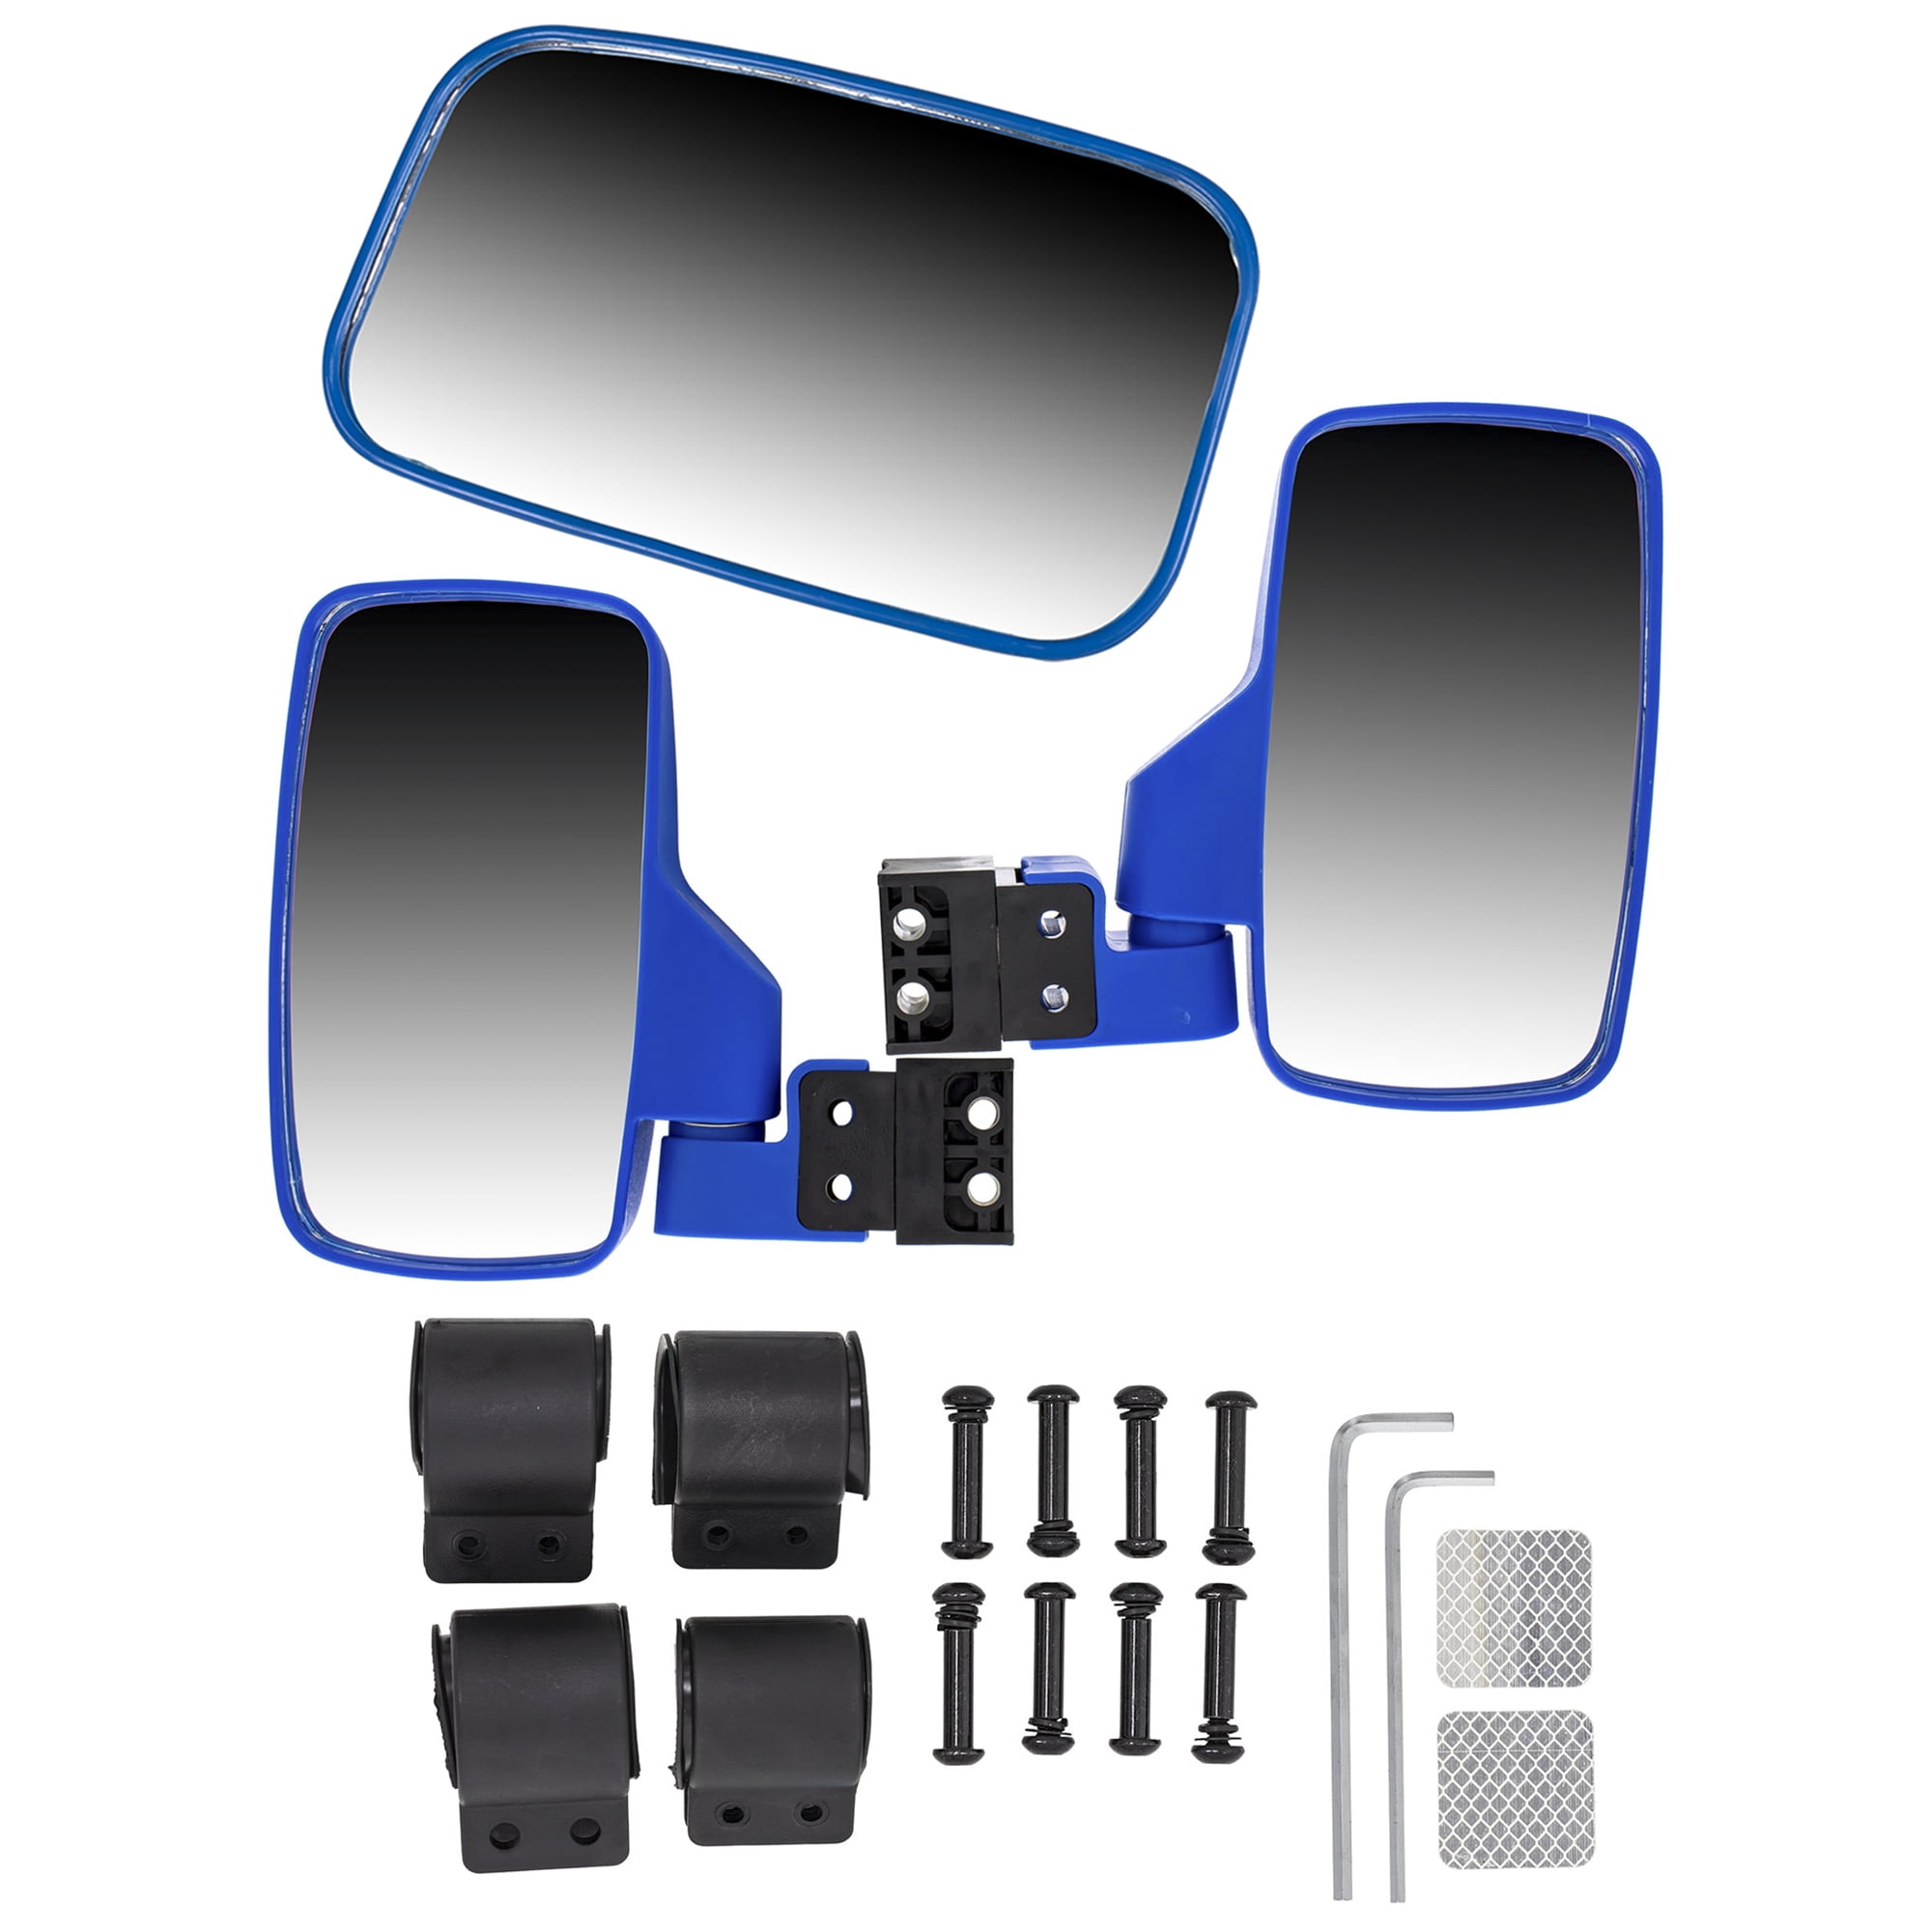 8TEN Grey Offroad Break-Away Side View Mirror Set for UTV Side x Side Utility Vehicle w/ 1.75 & 2 Roll Cage Bar High Impact Large Wide View 